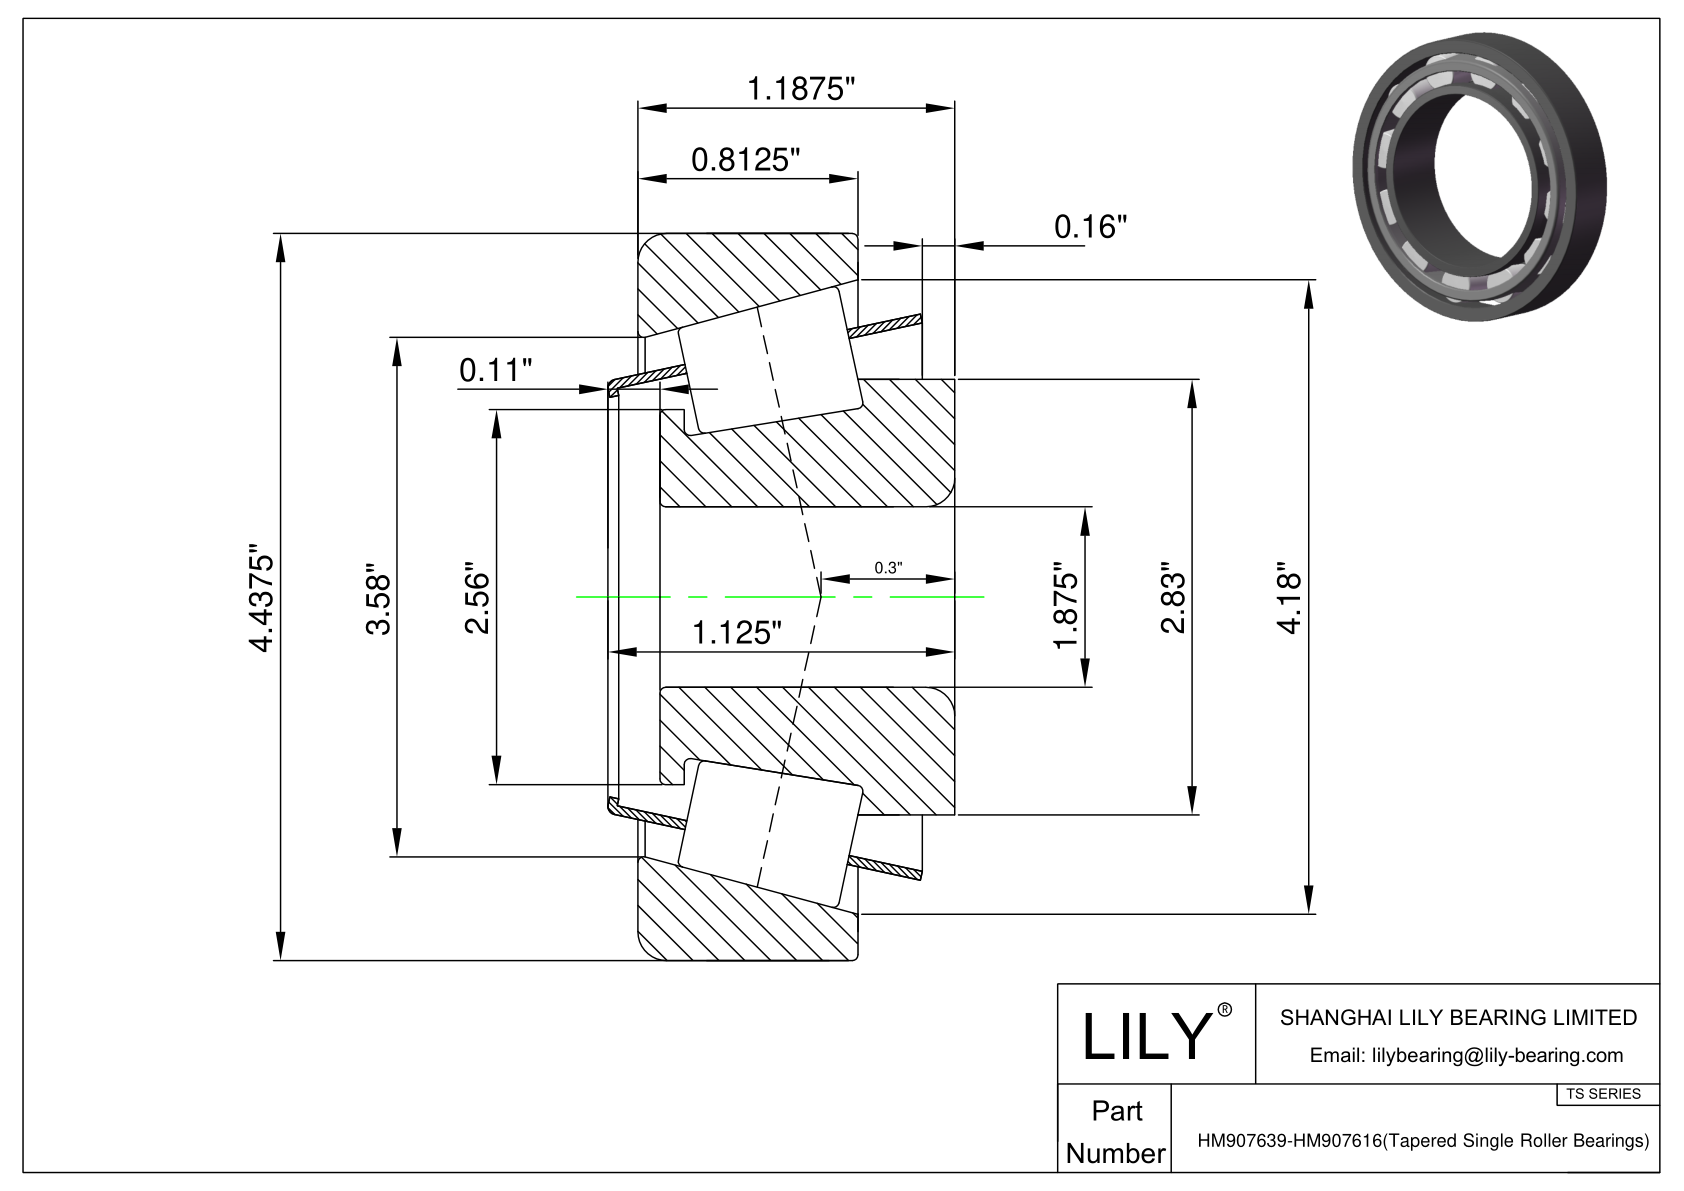 HM907639-HM907616 TS (Tapered Single Roller Bearings) (Imperial) cad drawing